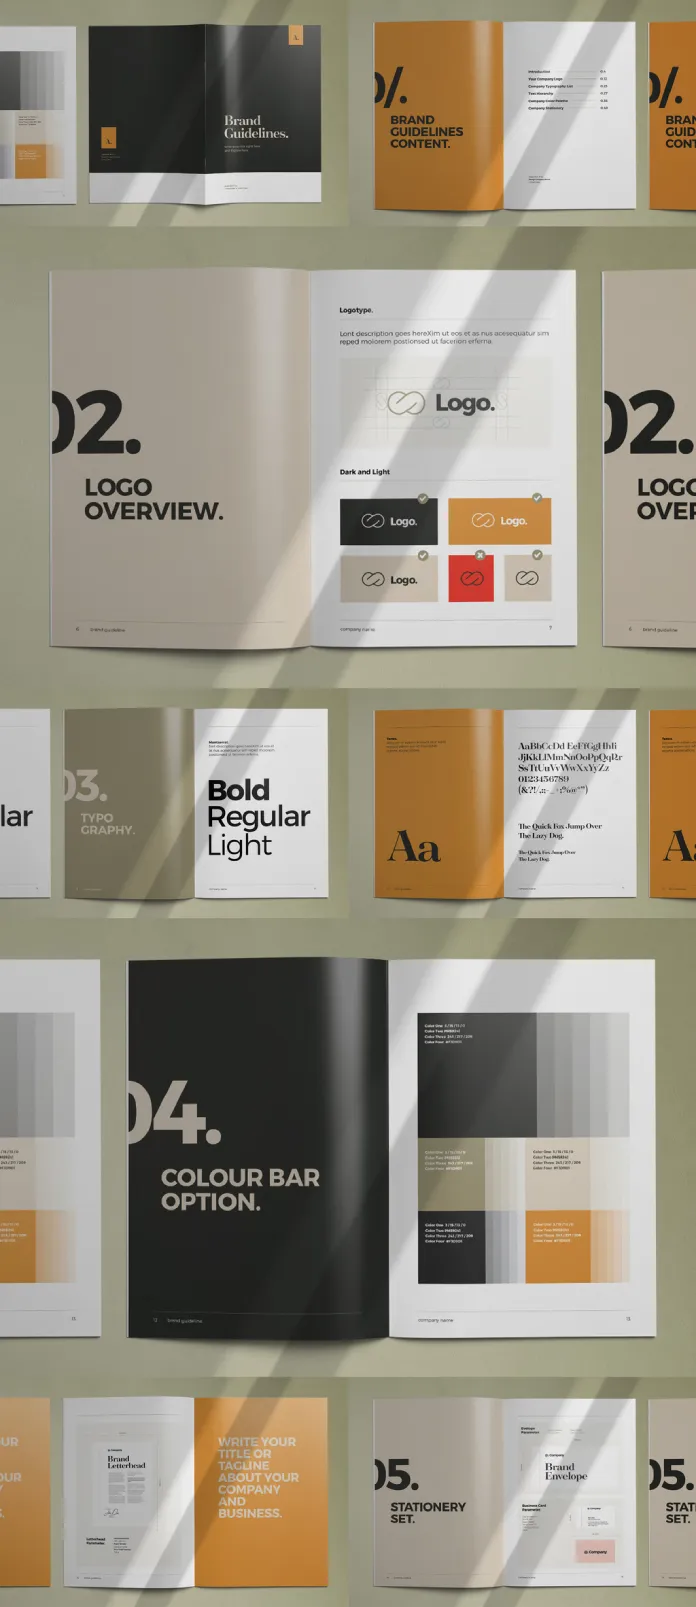 Download a sophisticated brand guidelines template for Adobe InDesign by Broluthfi.